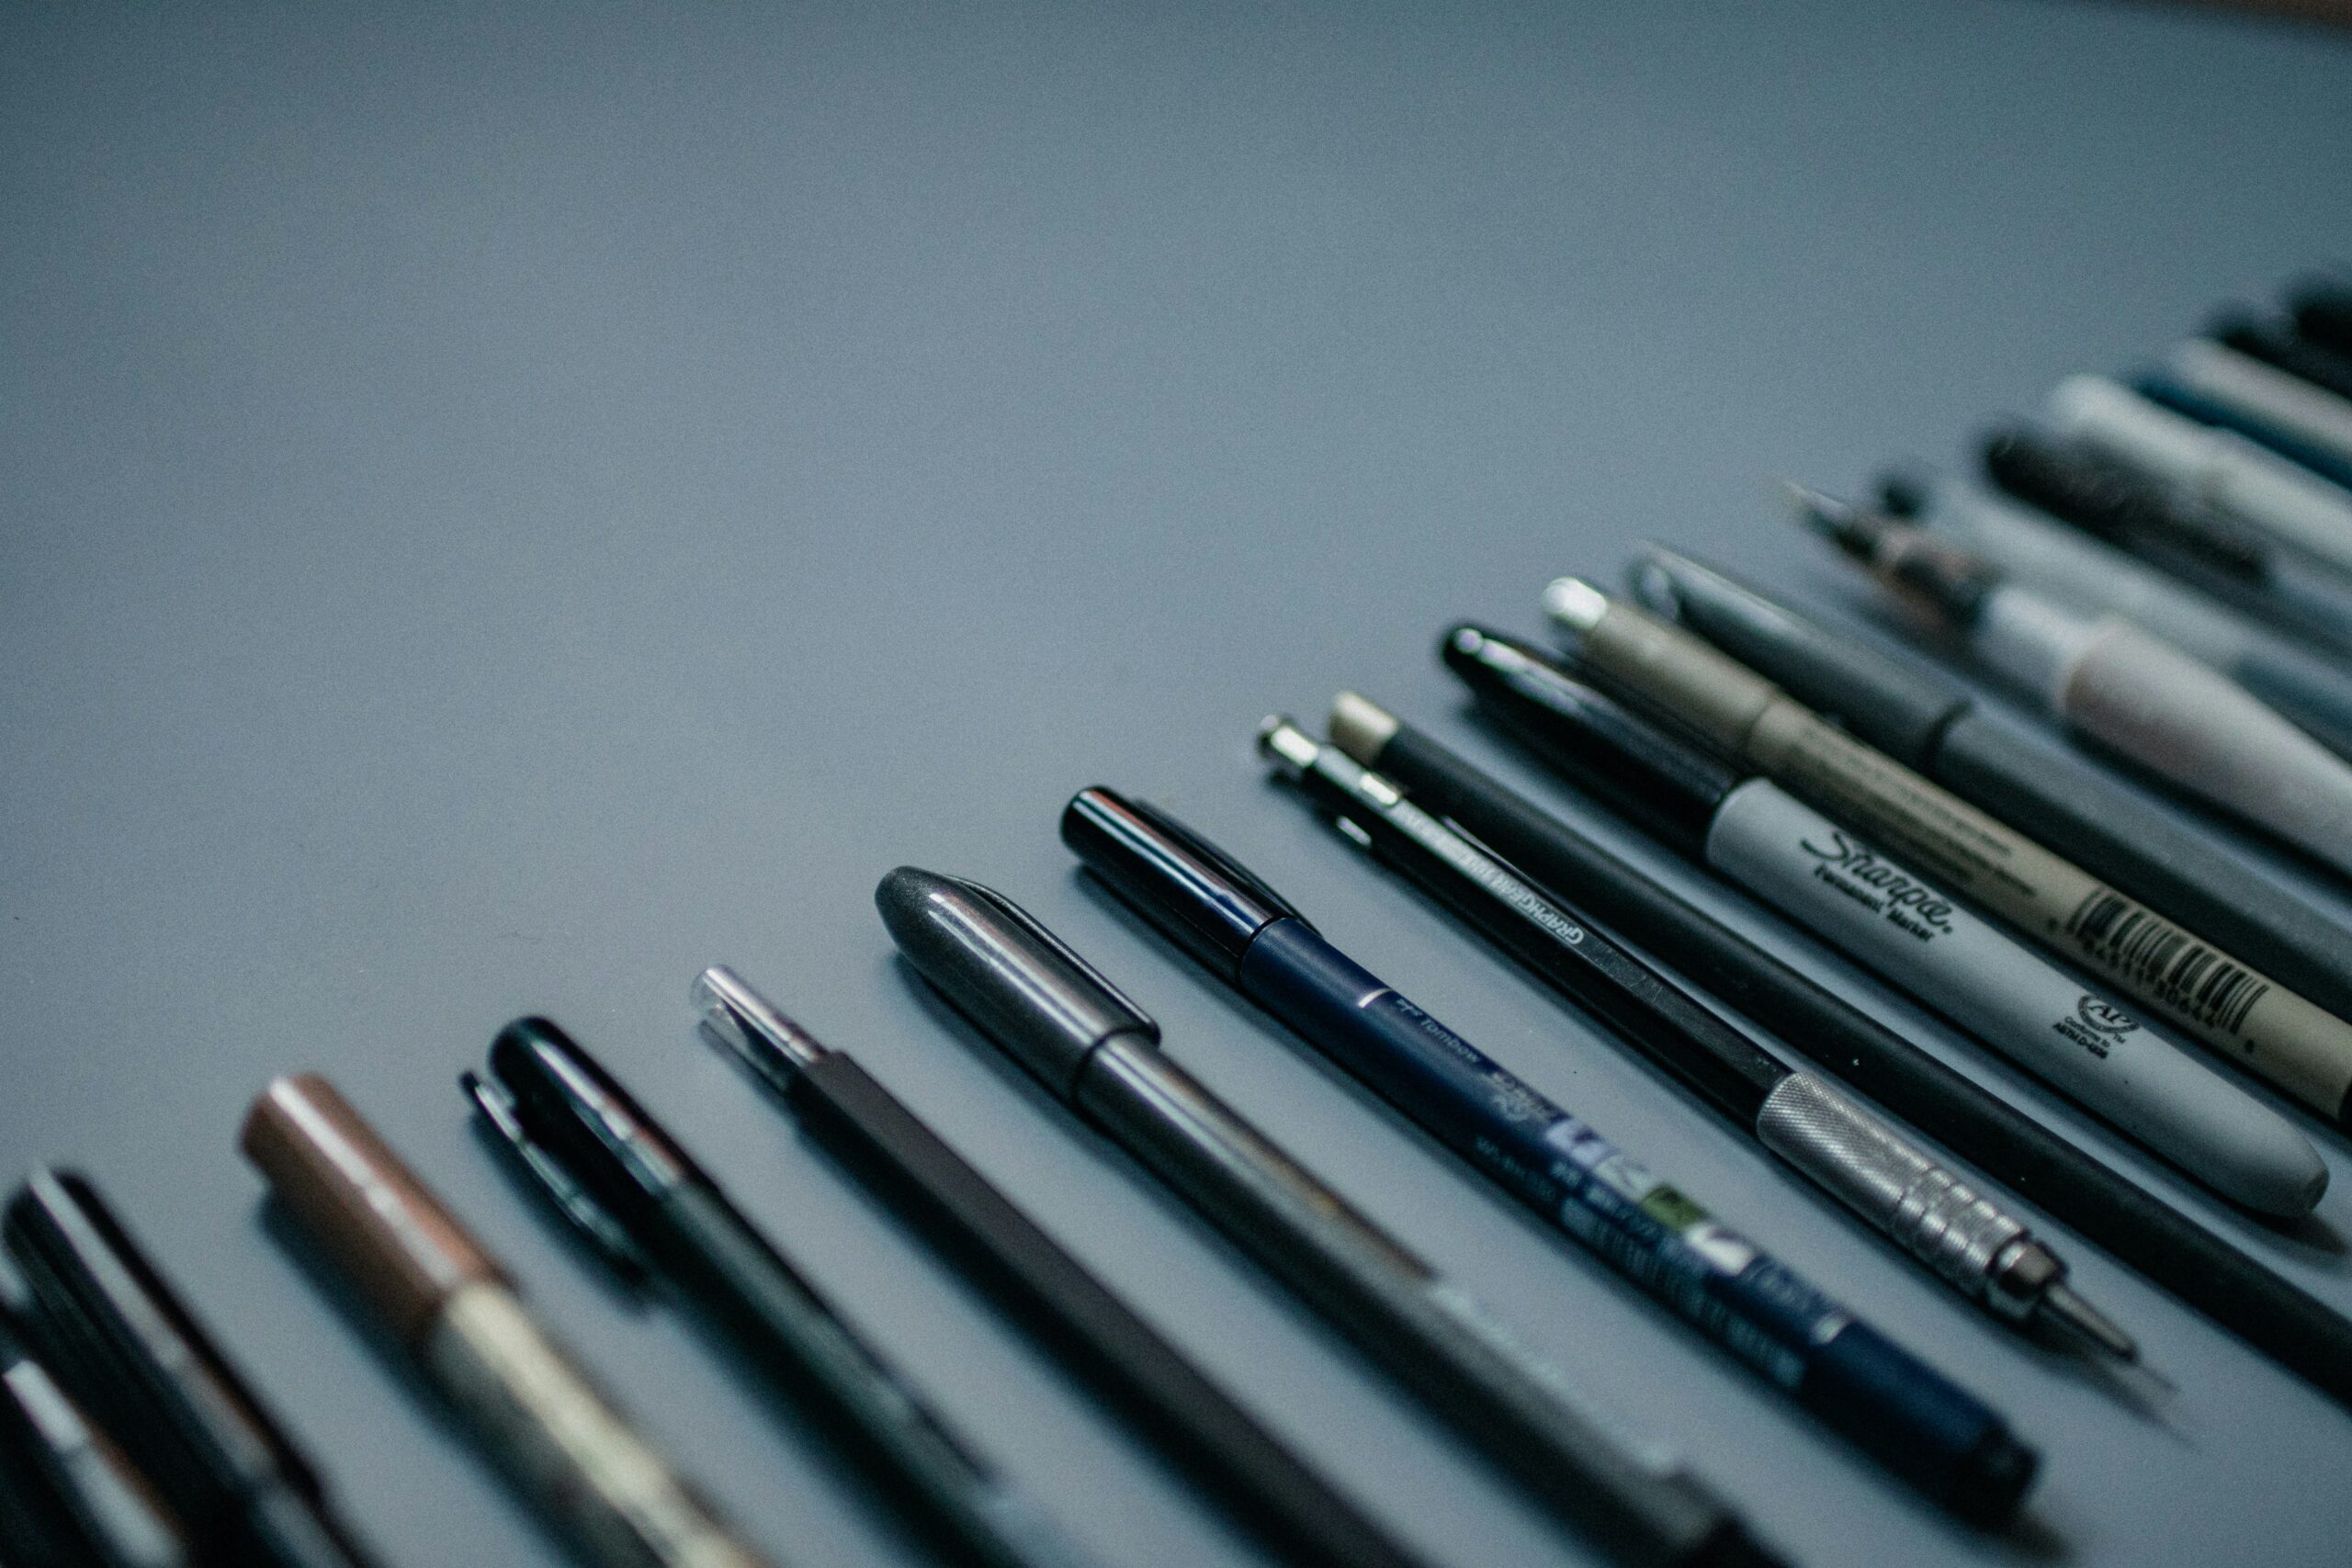 image of various writing utensils in a line.